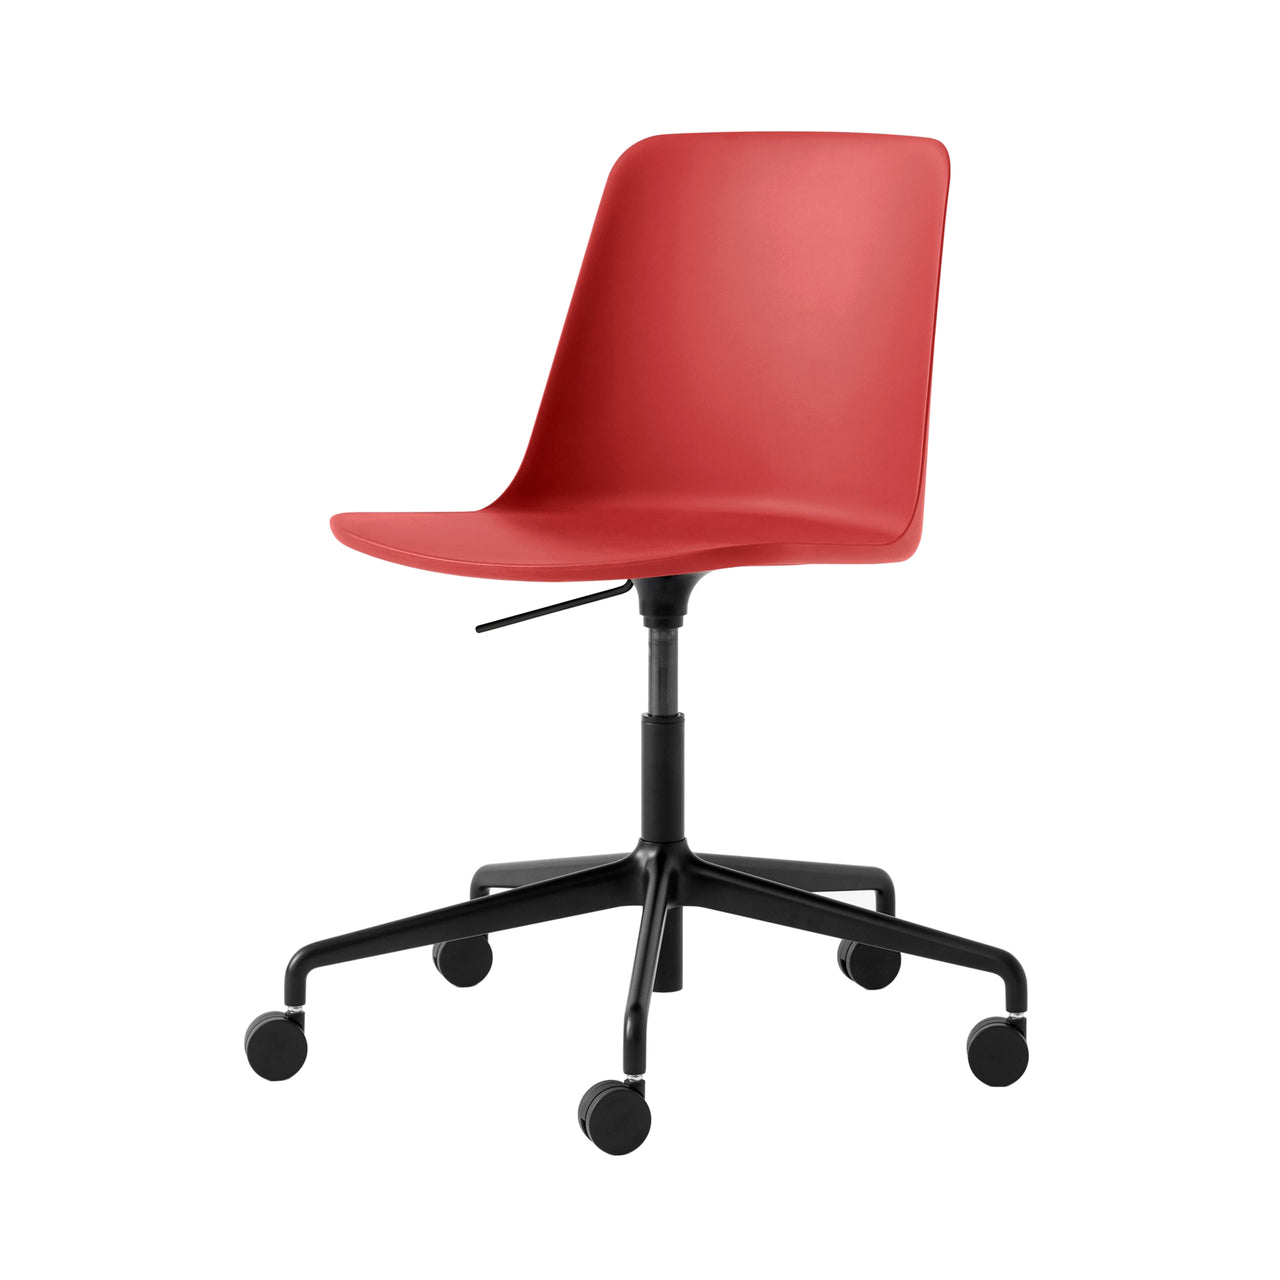 Rely Chair HW28: Vermilion Red + Black